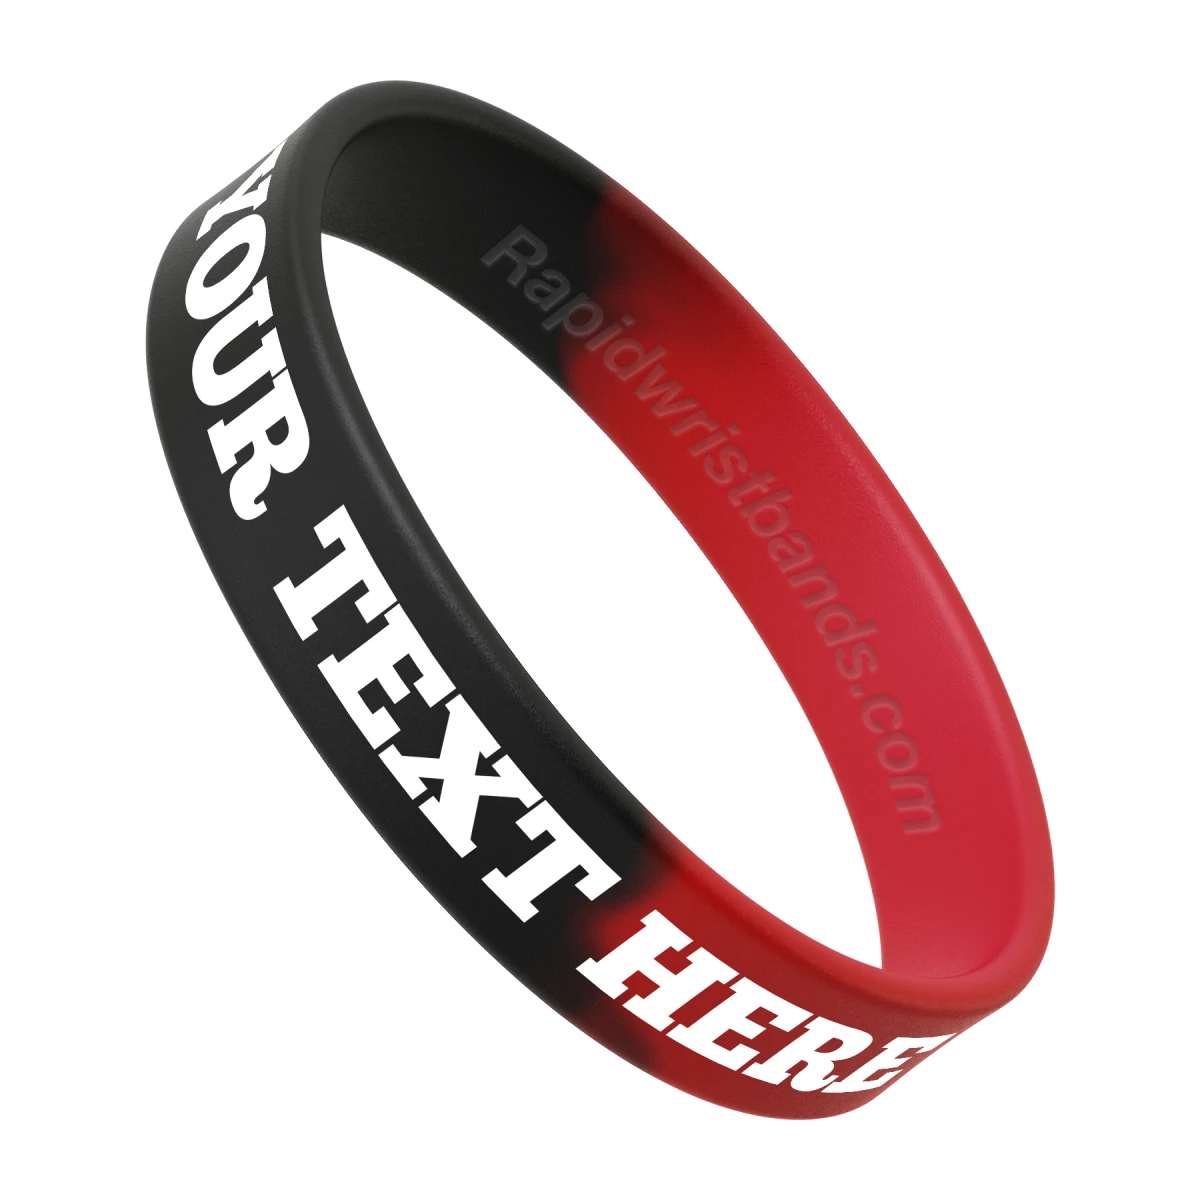 Segmented Black/Red Wristband With Your Text Here Printed In White